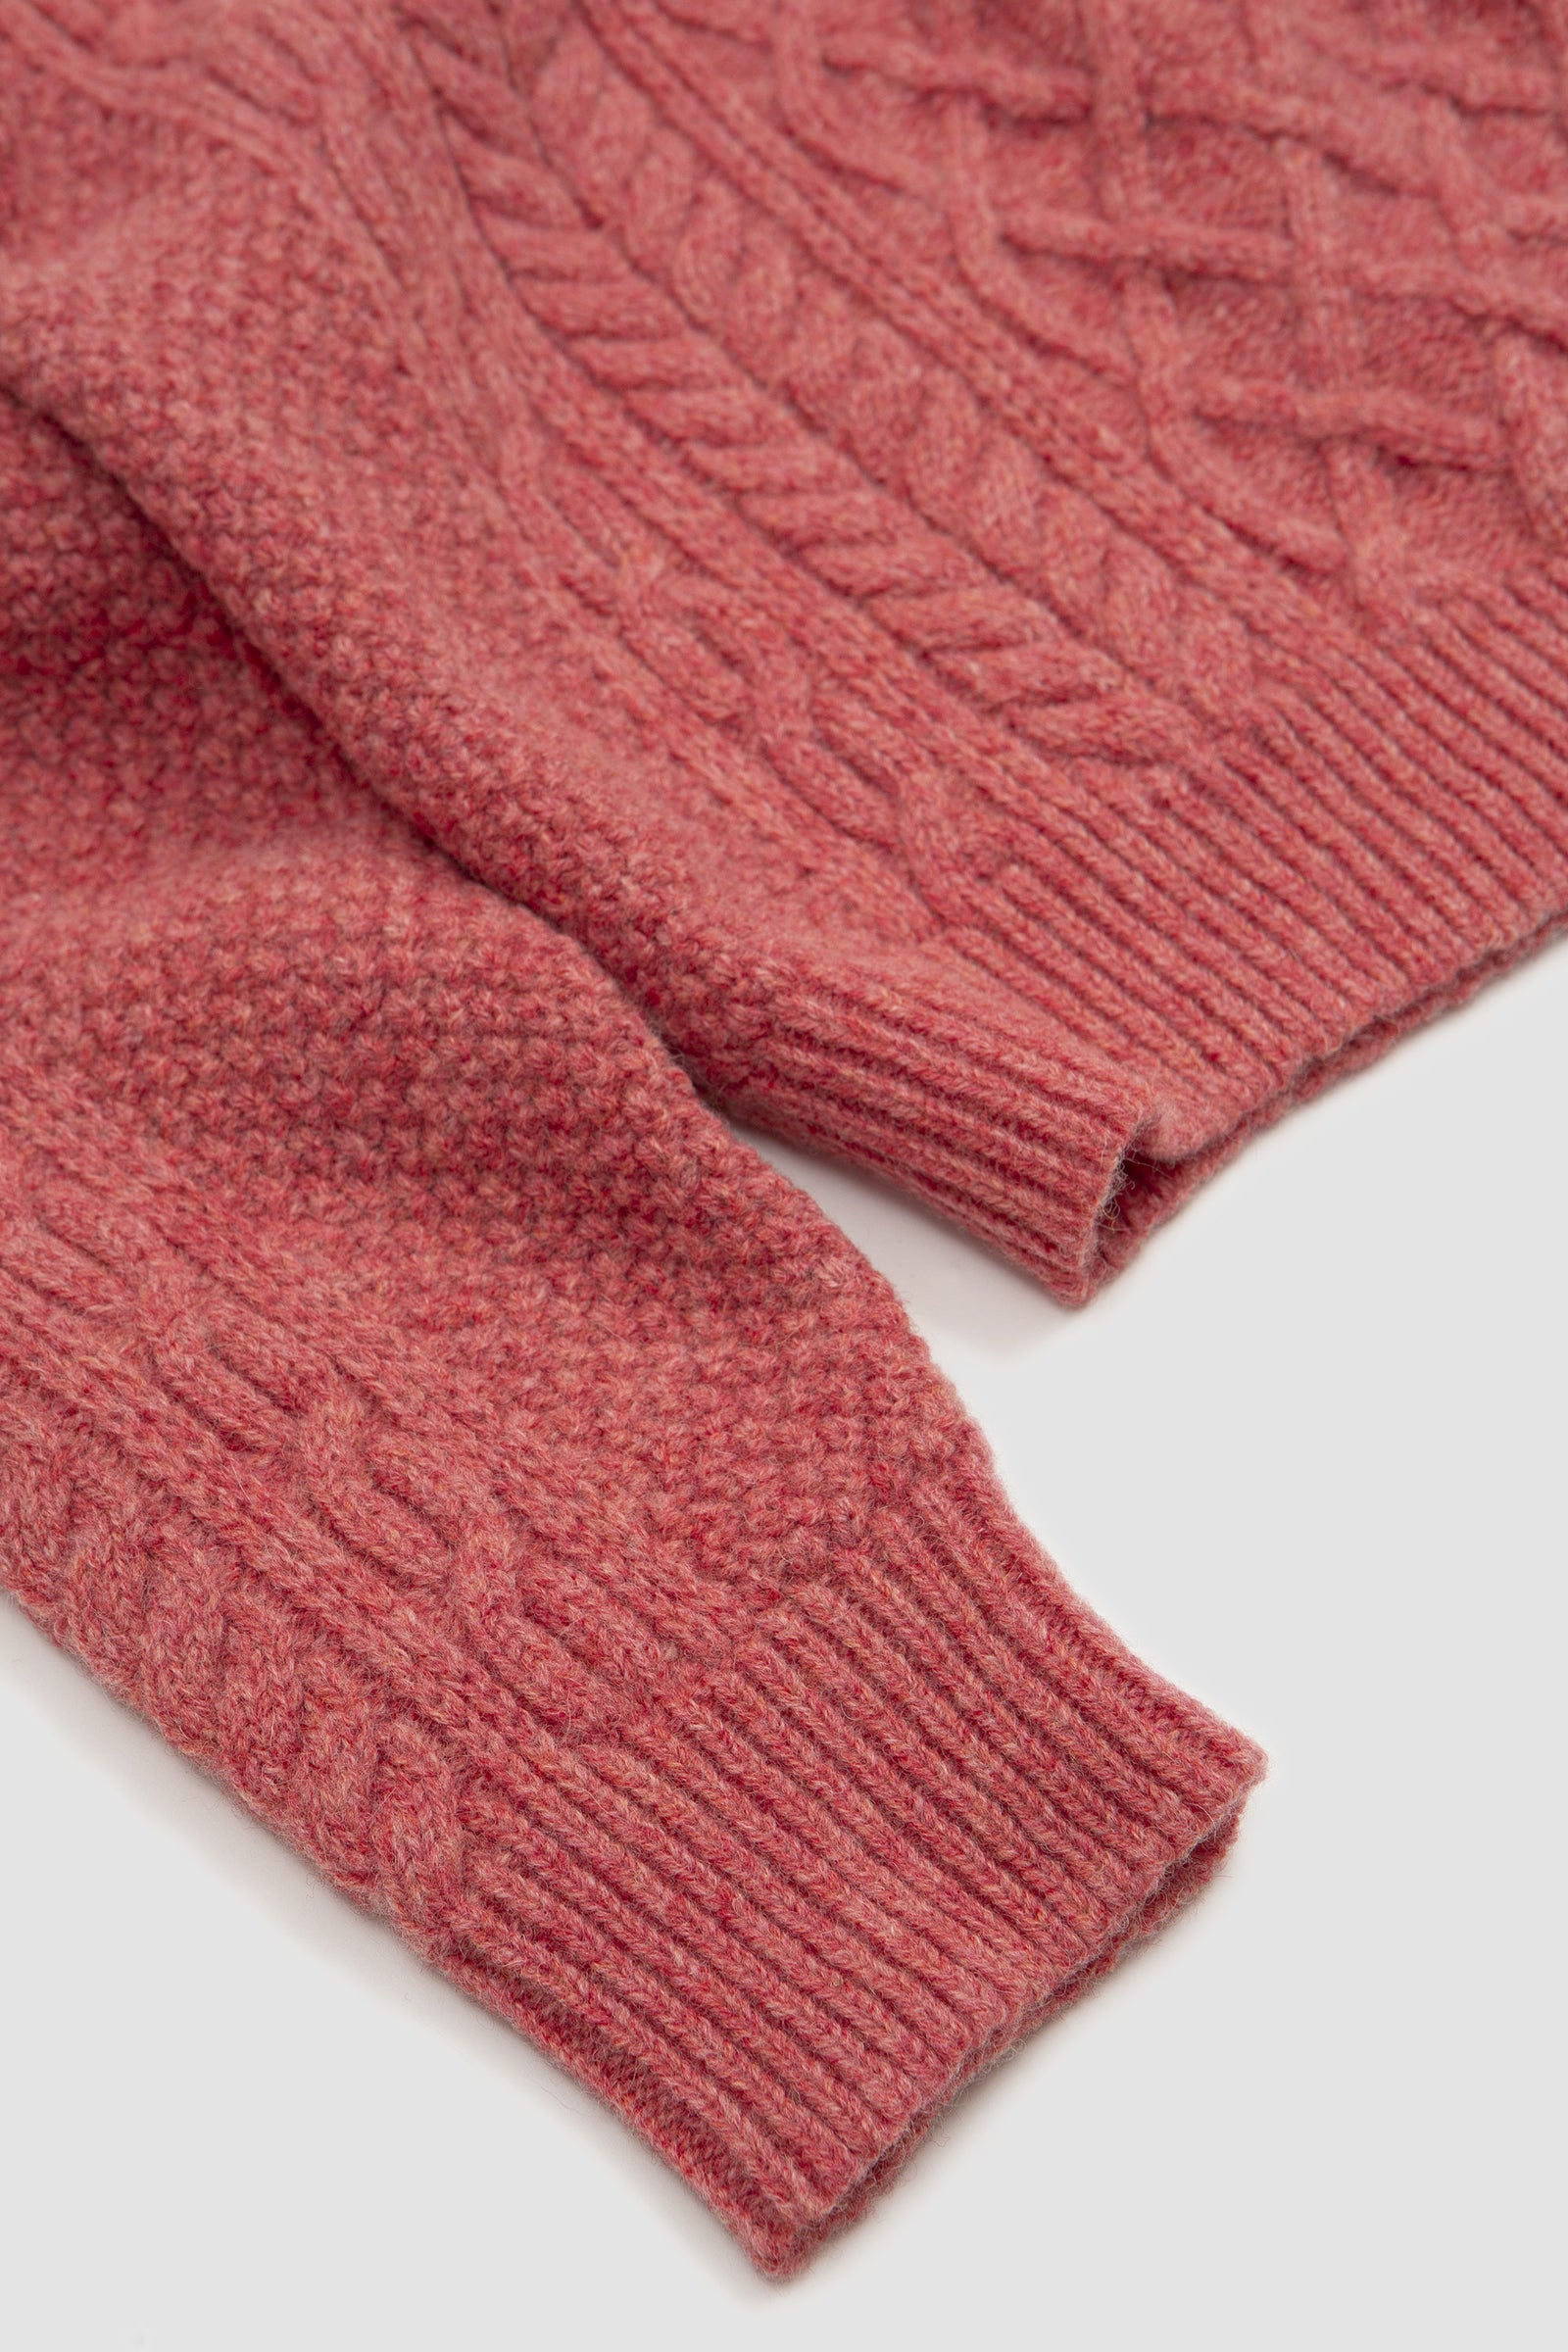 SPORTIVO [Cable knit sweater rose]